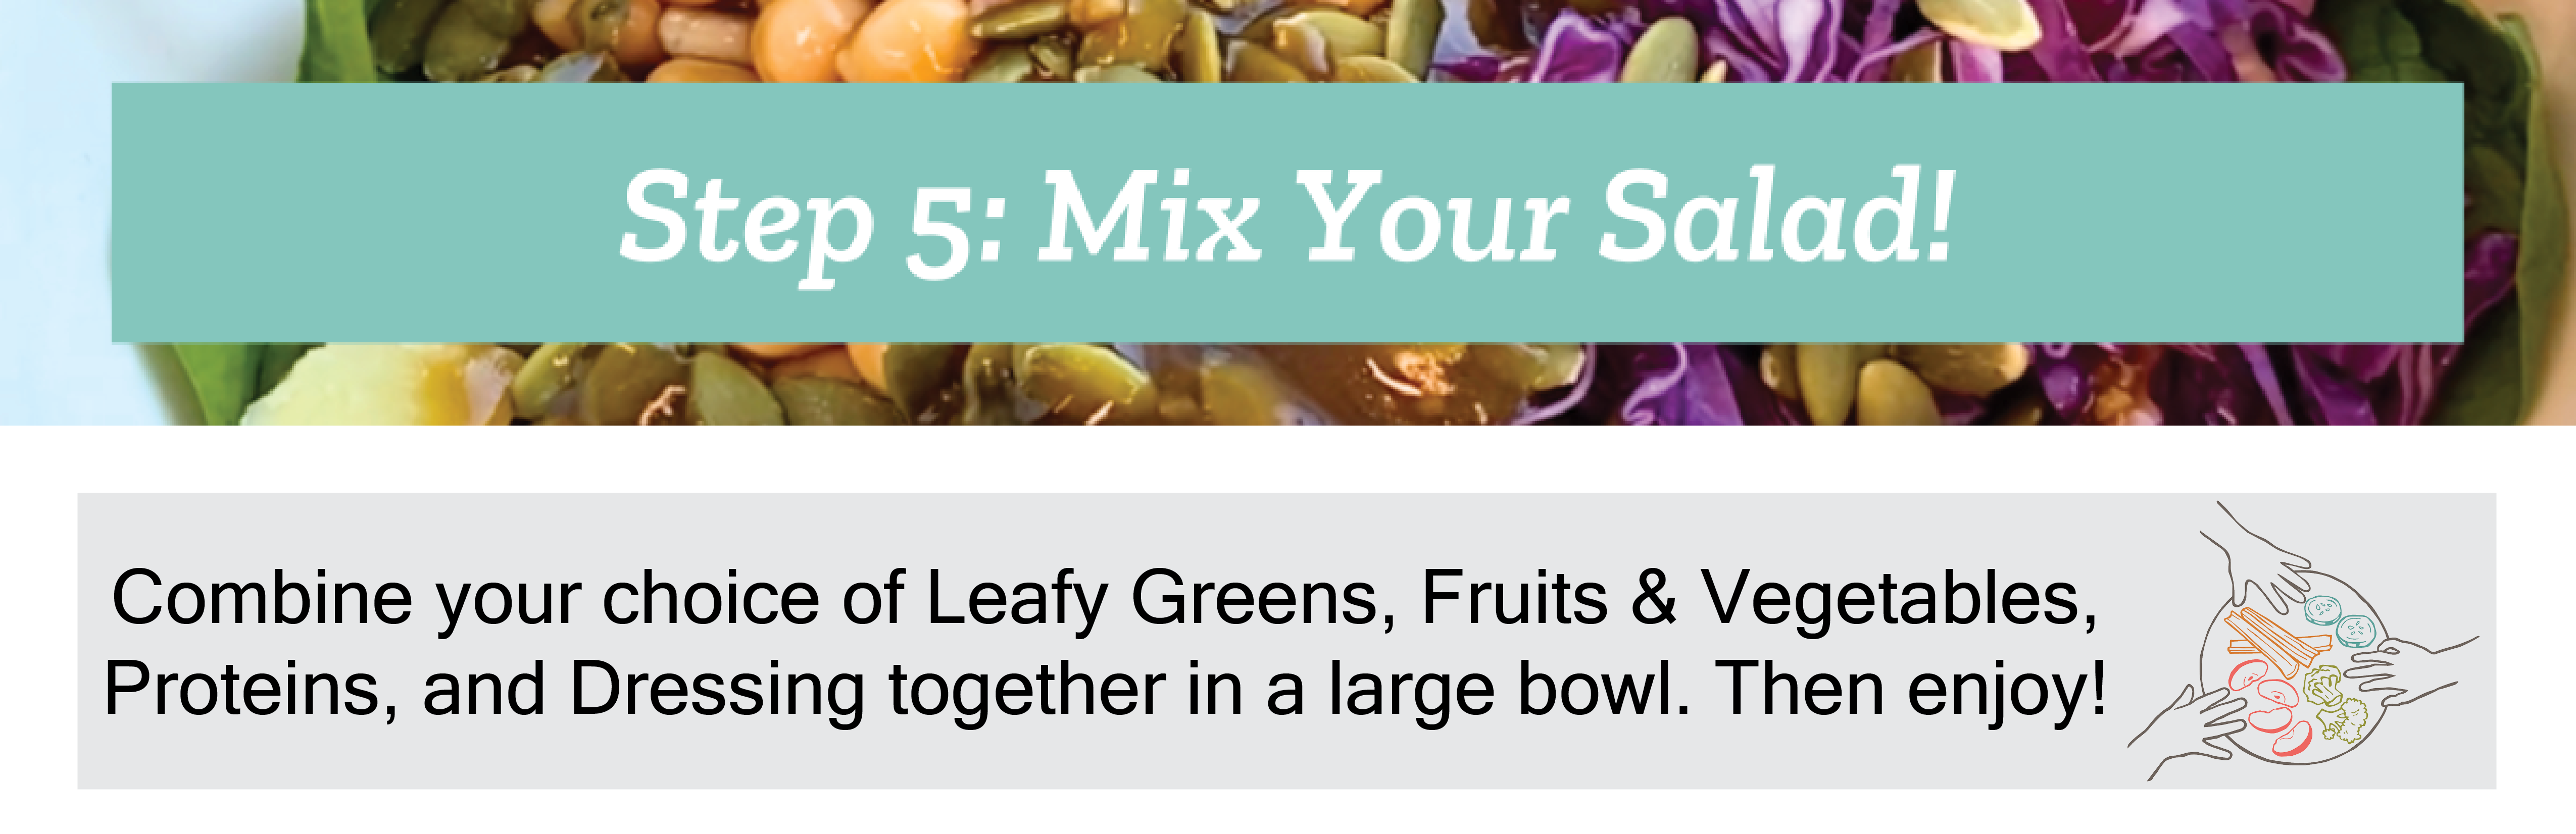 Mix your salad: combine your leafy greens, fruits and vegetables, proteins, and dressing in a large bowl. Then Enjoy 